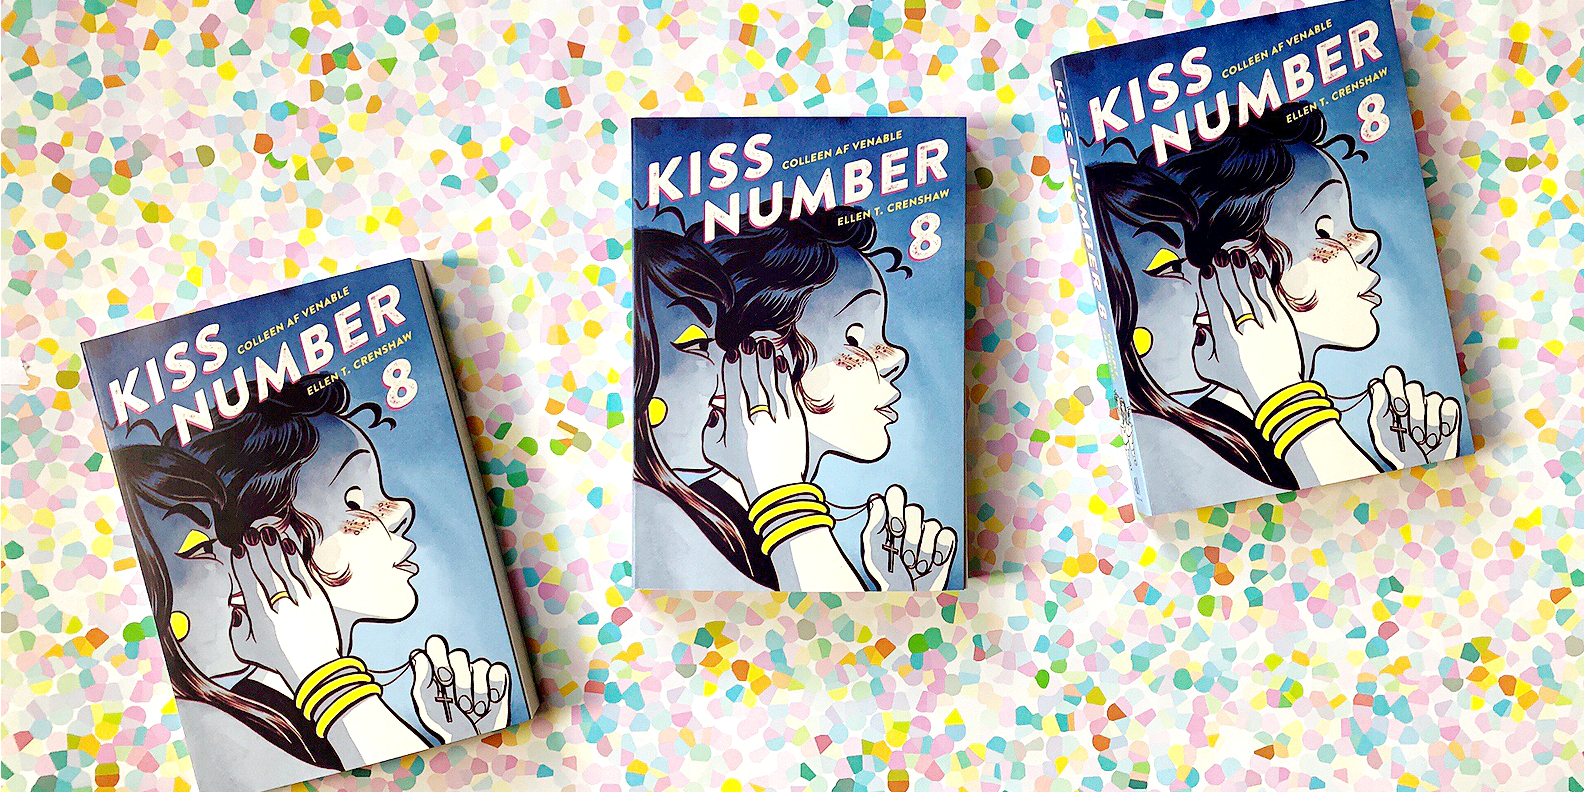 An Interview with Colleen AF Veneable and Ellen T. Crenshaw, creators of Kiss Number 8